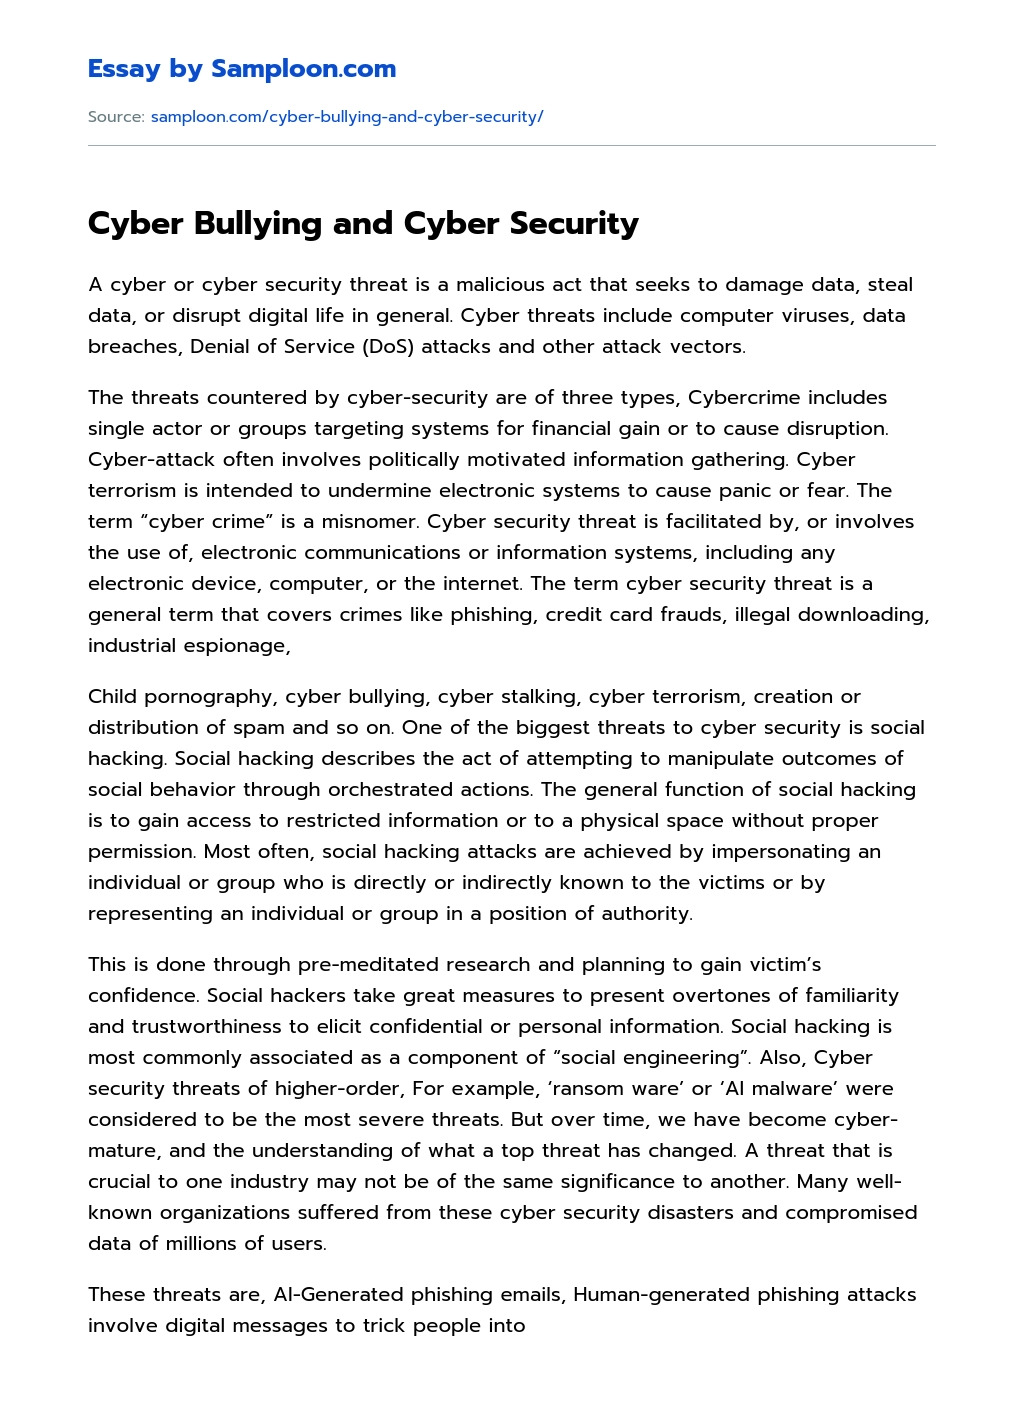 Cyber Bullying and Cyber Security essay